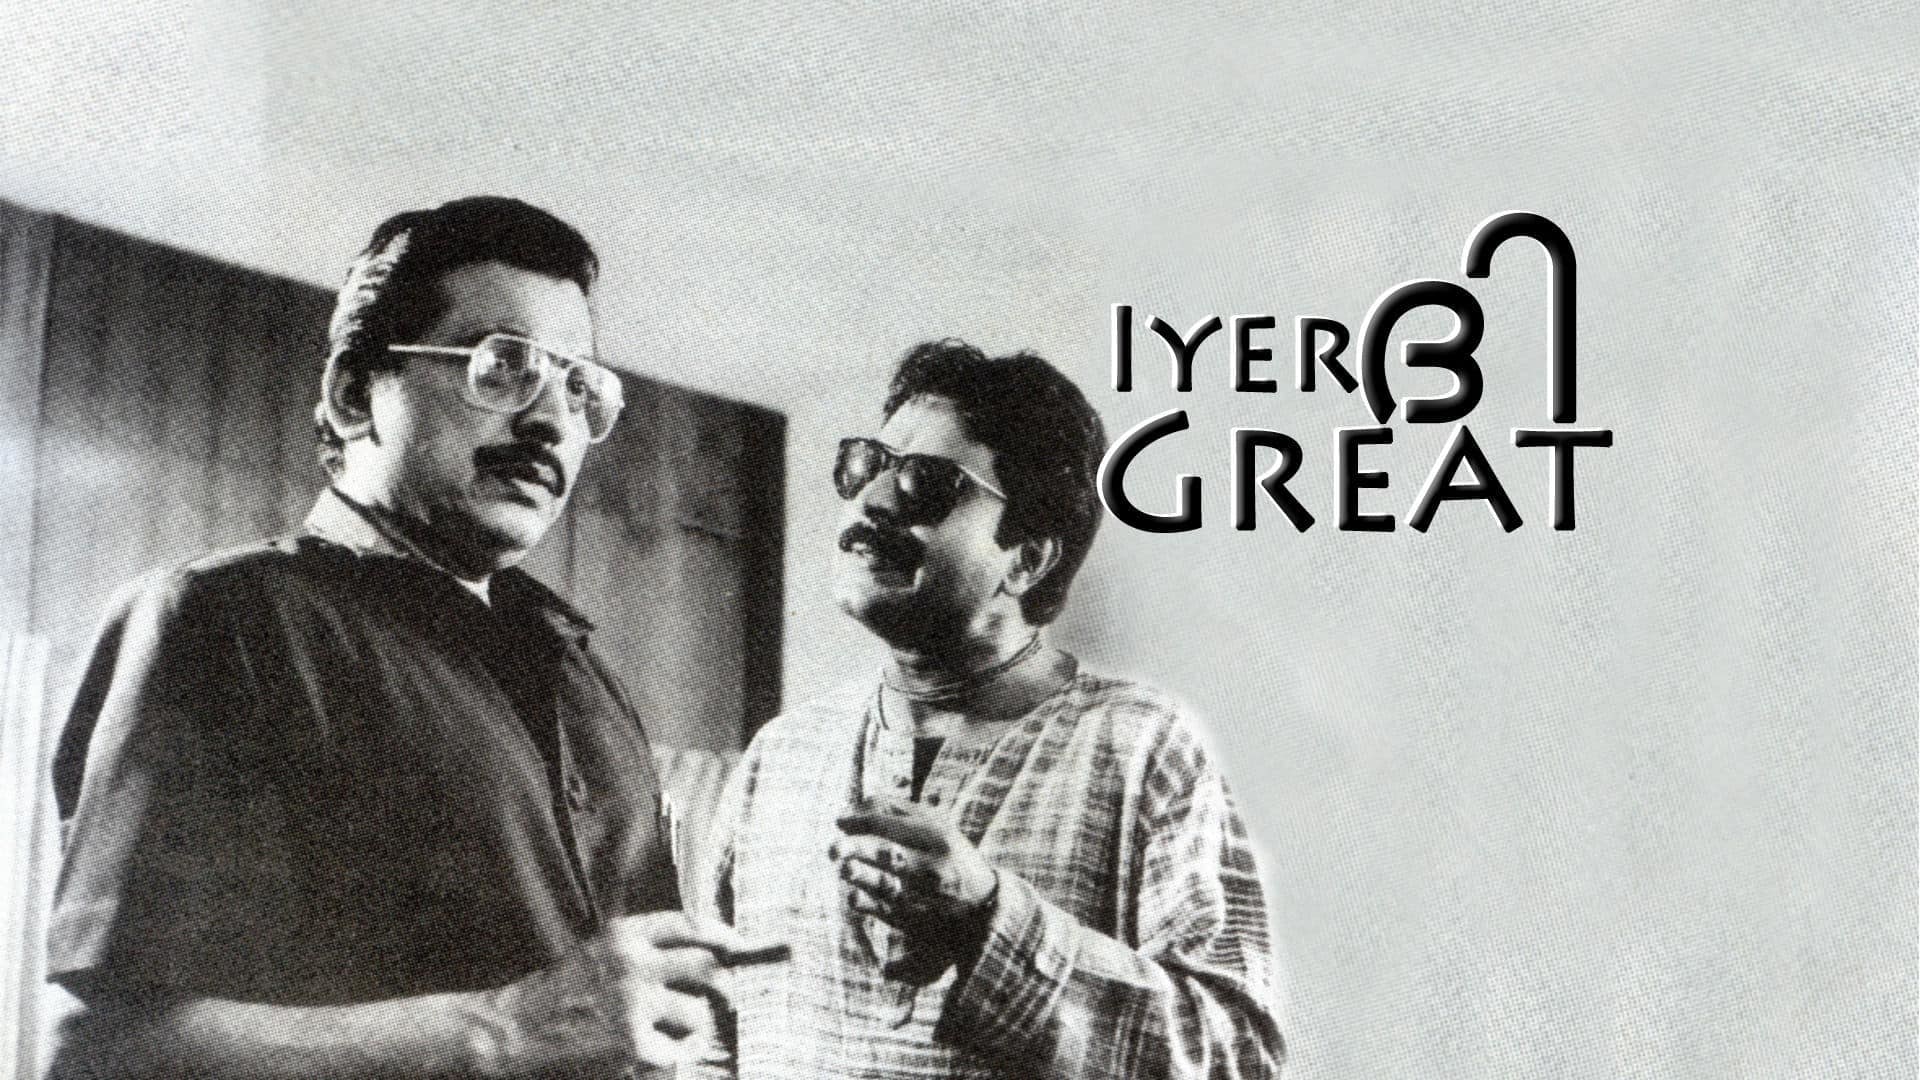 Iyer The Great